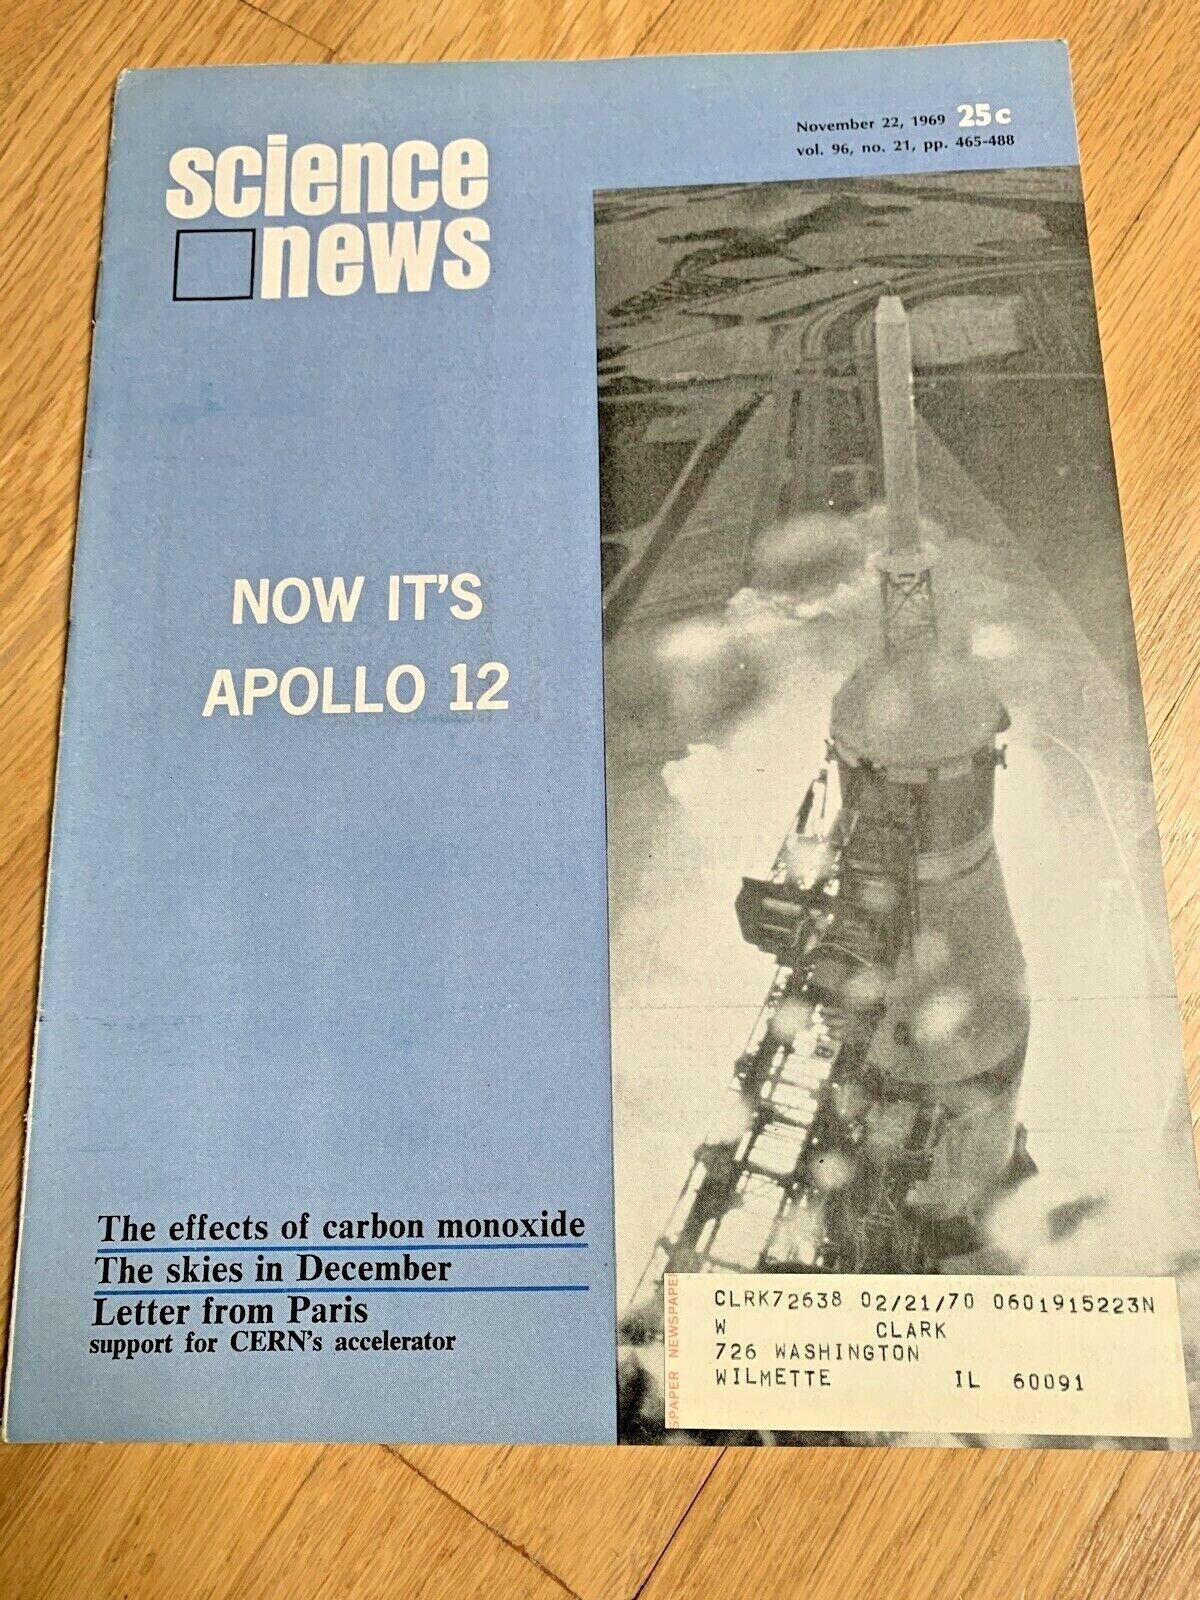 November 1969 SCIENCE NEWS Magazine APOLLO 12 - More Footsteps on the Moon